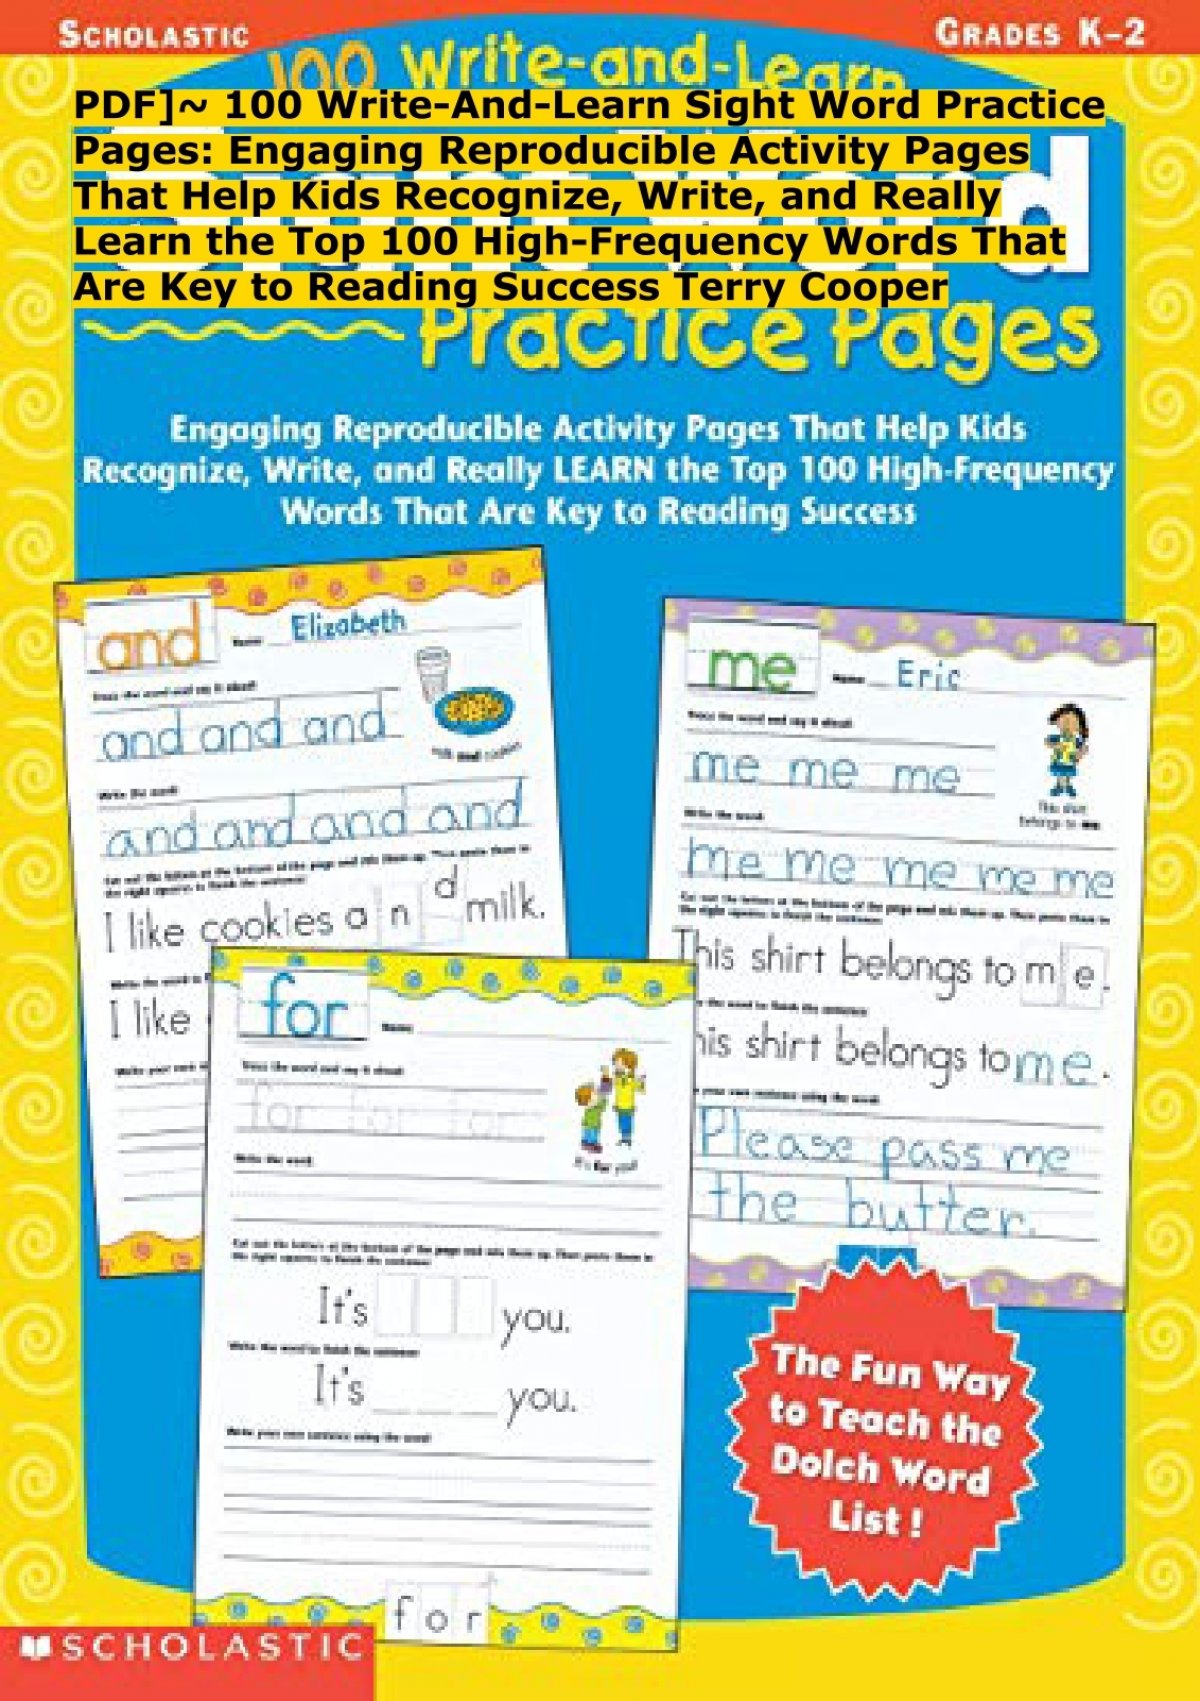 pdf-100-write-and-learn-sight-word-practice-pages-engaging